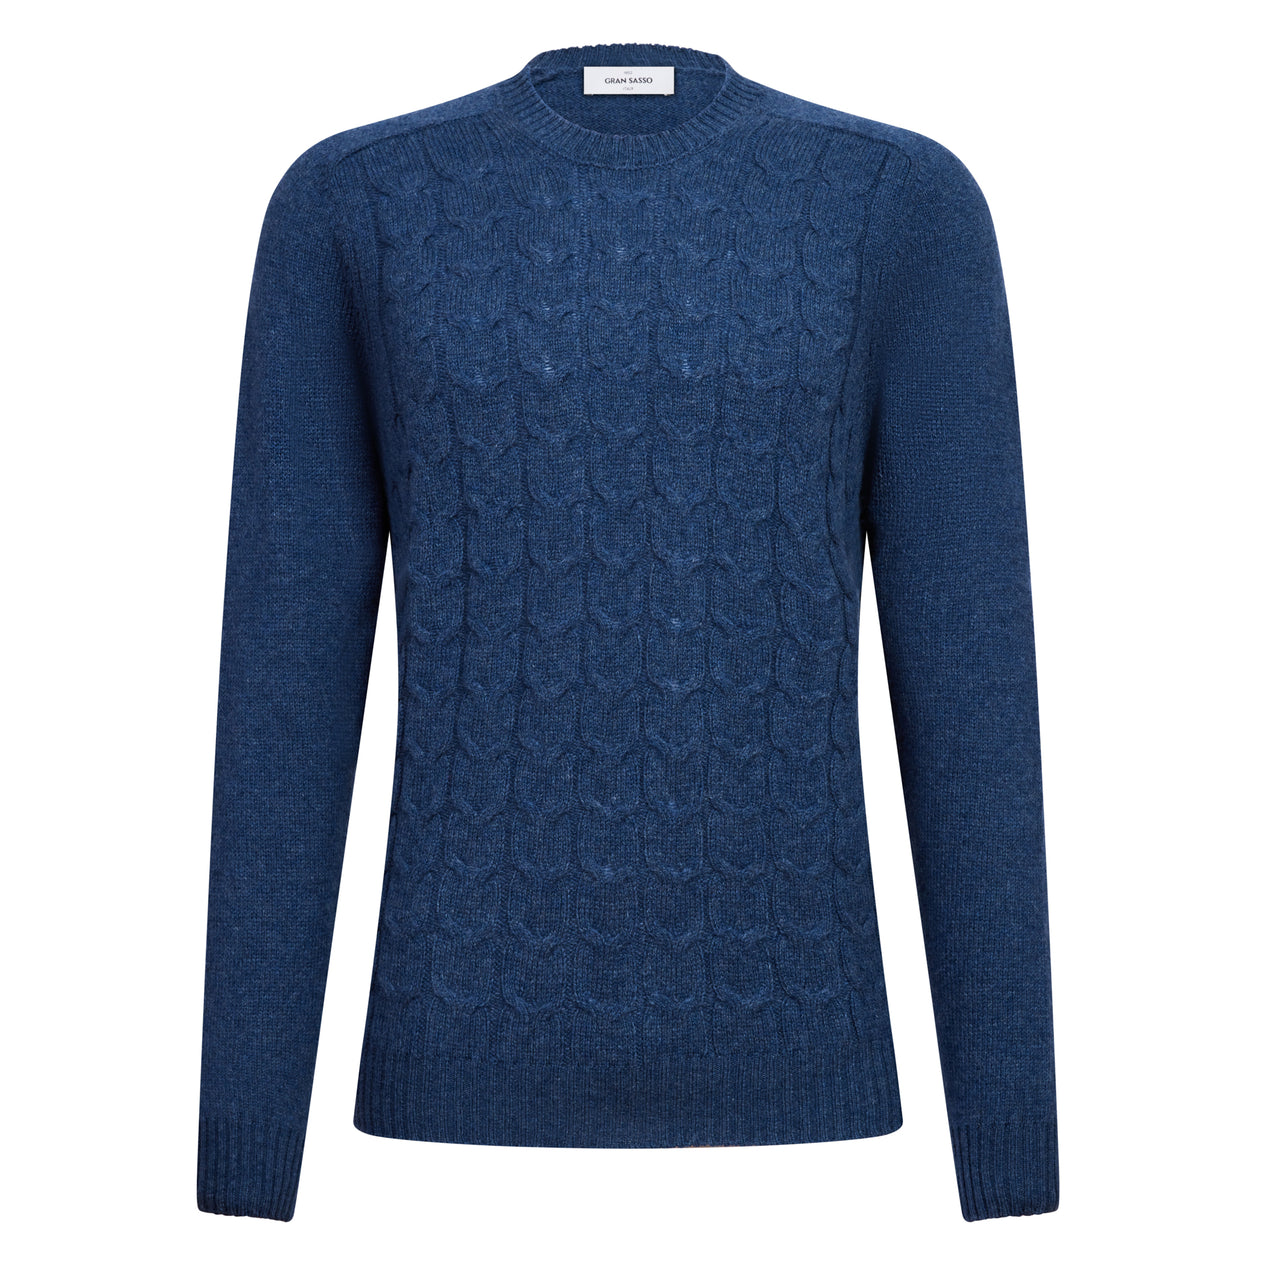 GRAN SASSO Air Wool Cable Crew Neck Knit NAVY